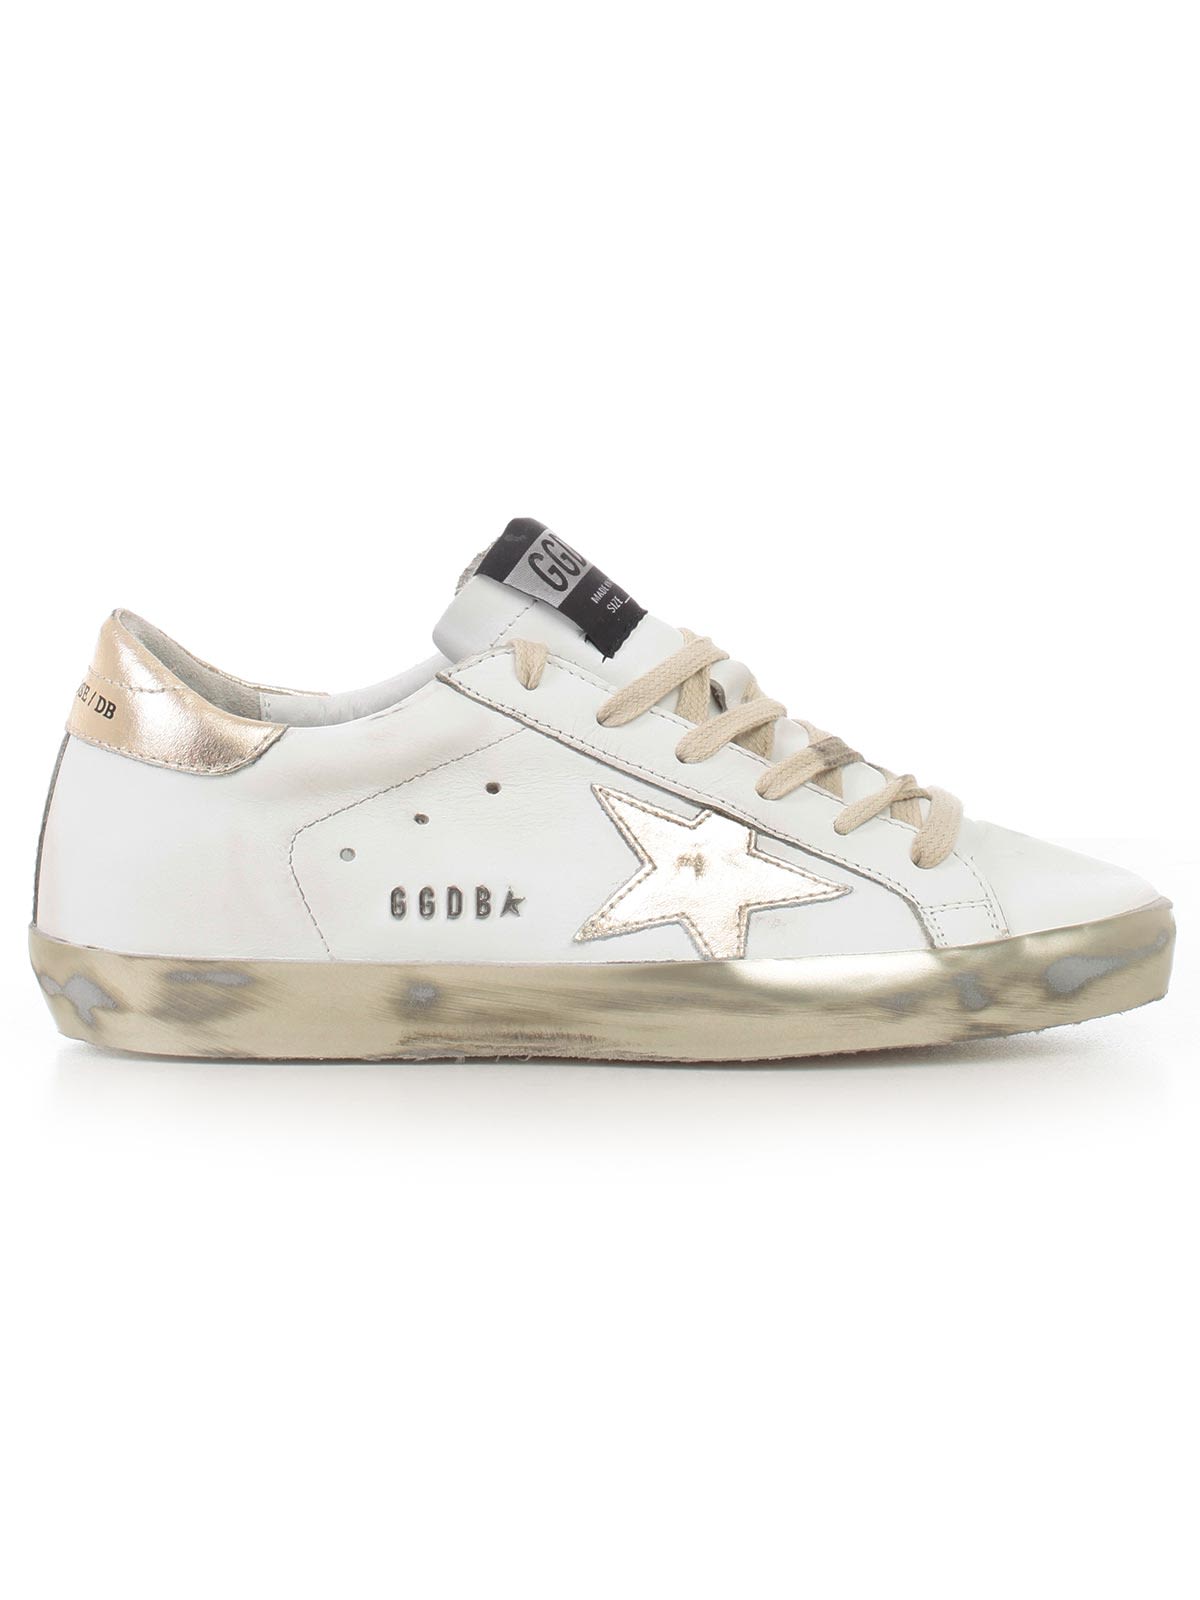 Shop Deluxe Superstar Sneakers In White Gold Star